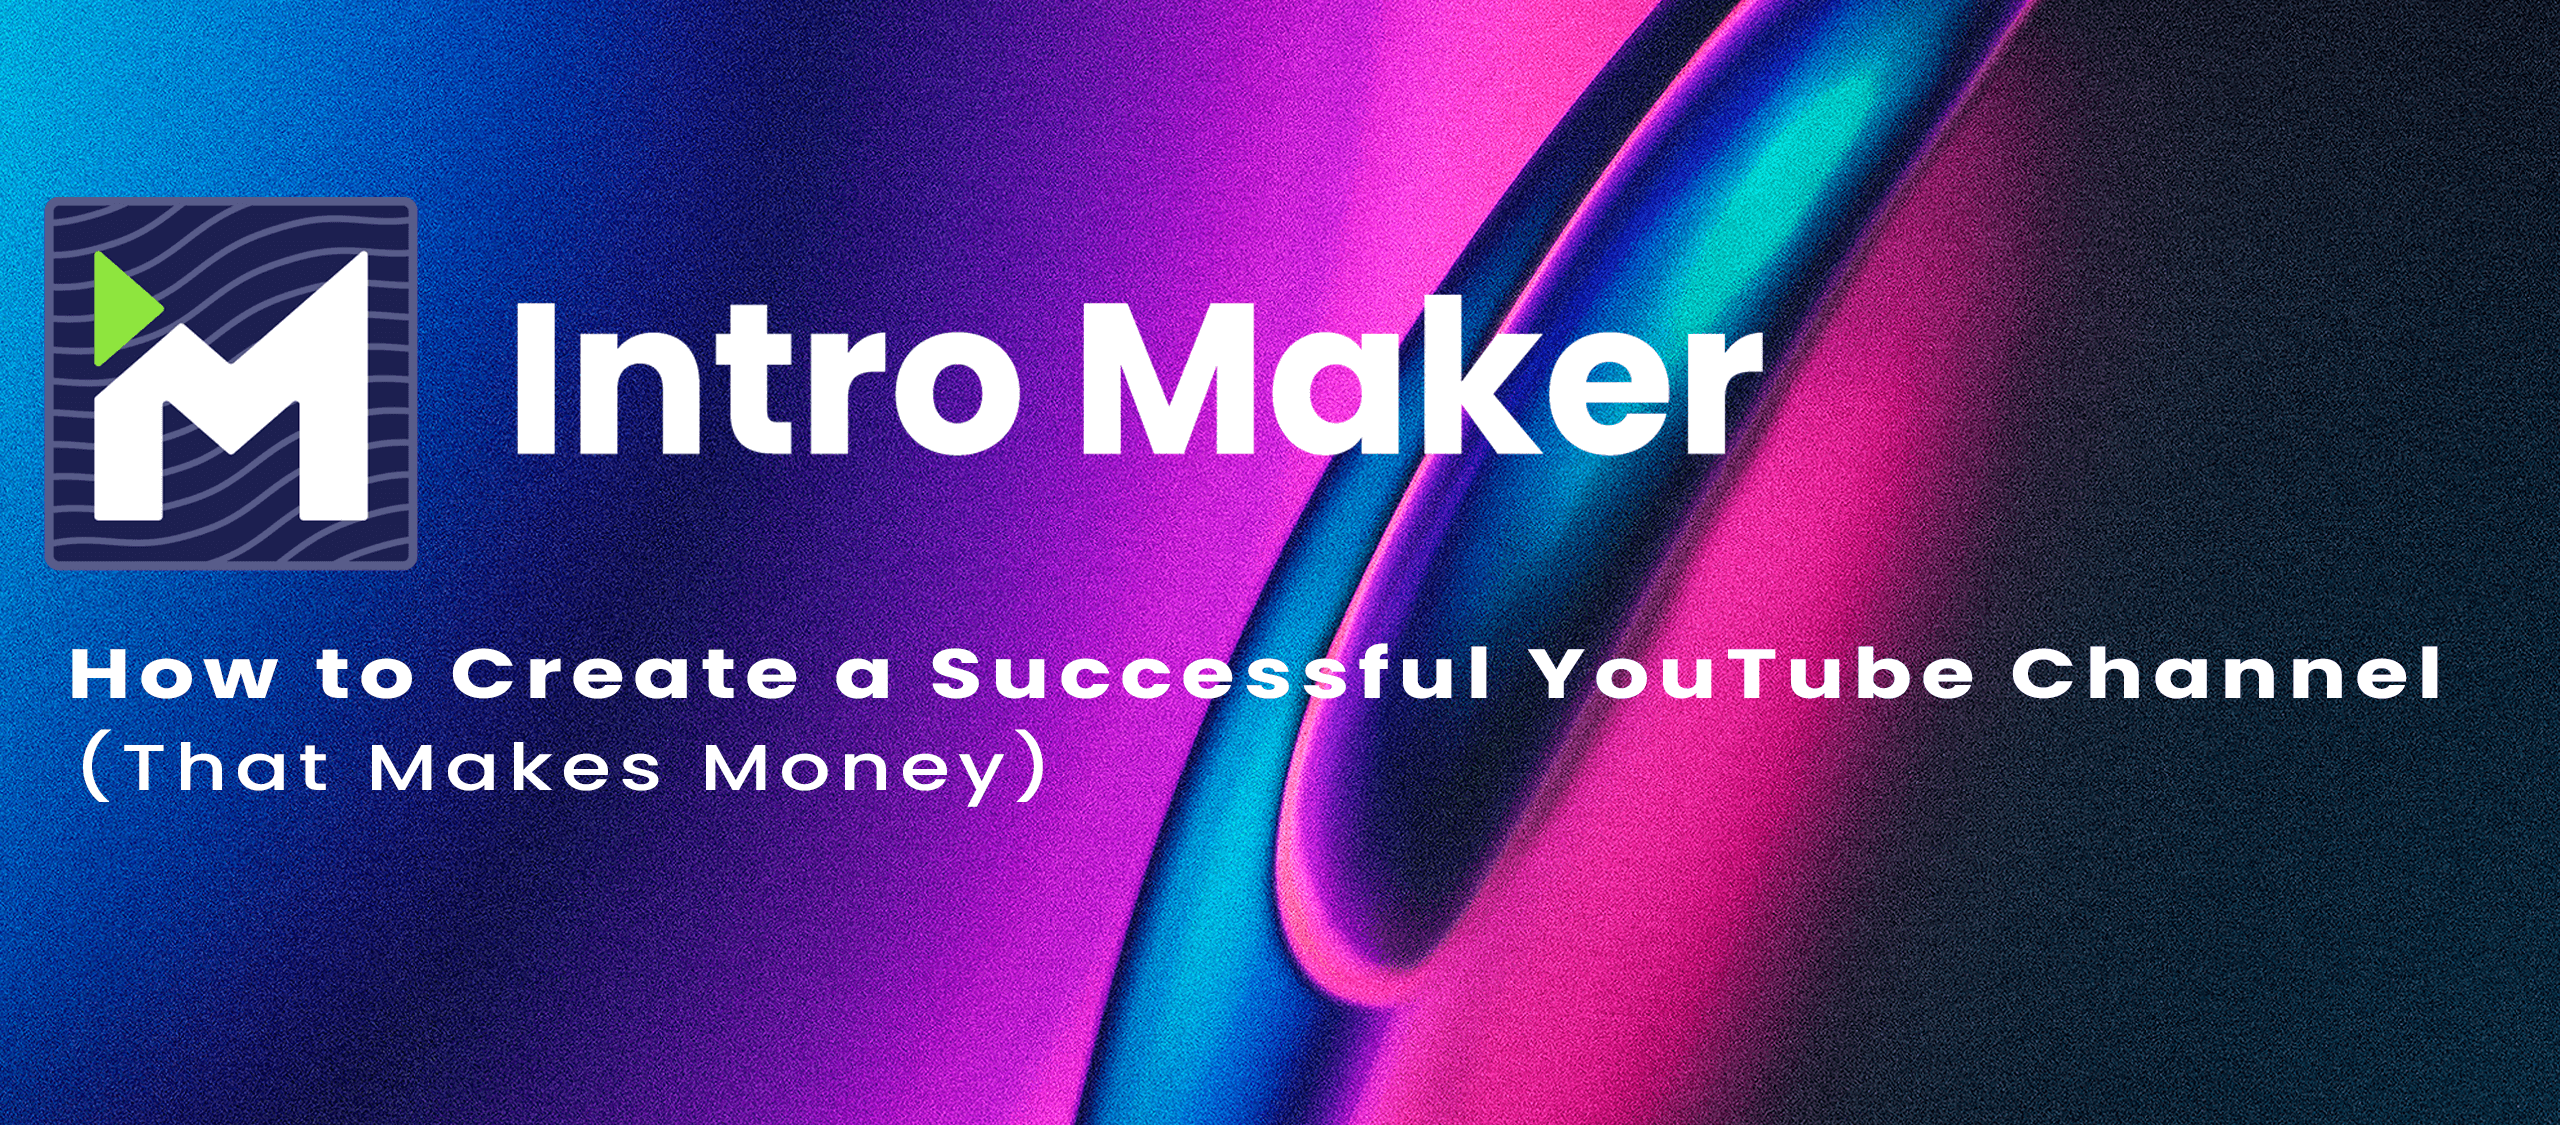 How to Create a Successful YouTube Channel (That Makes Money)